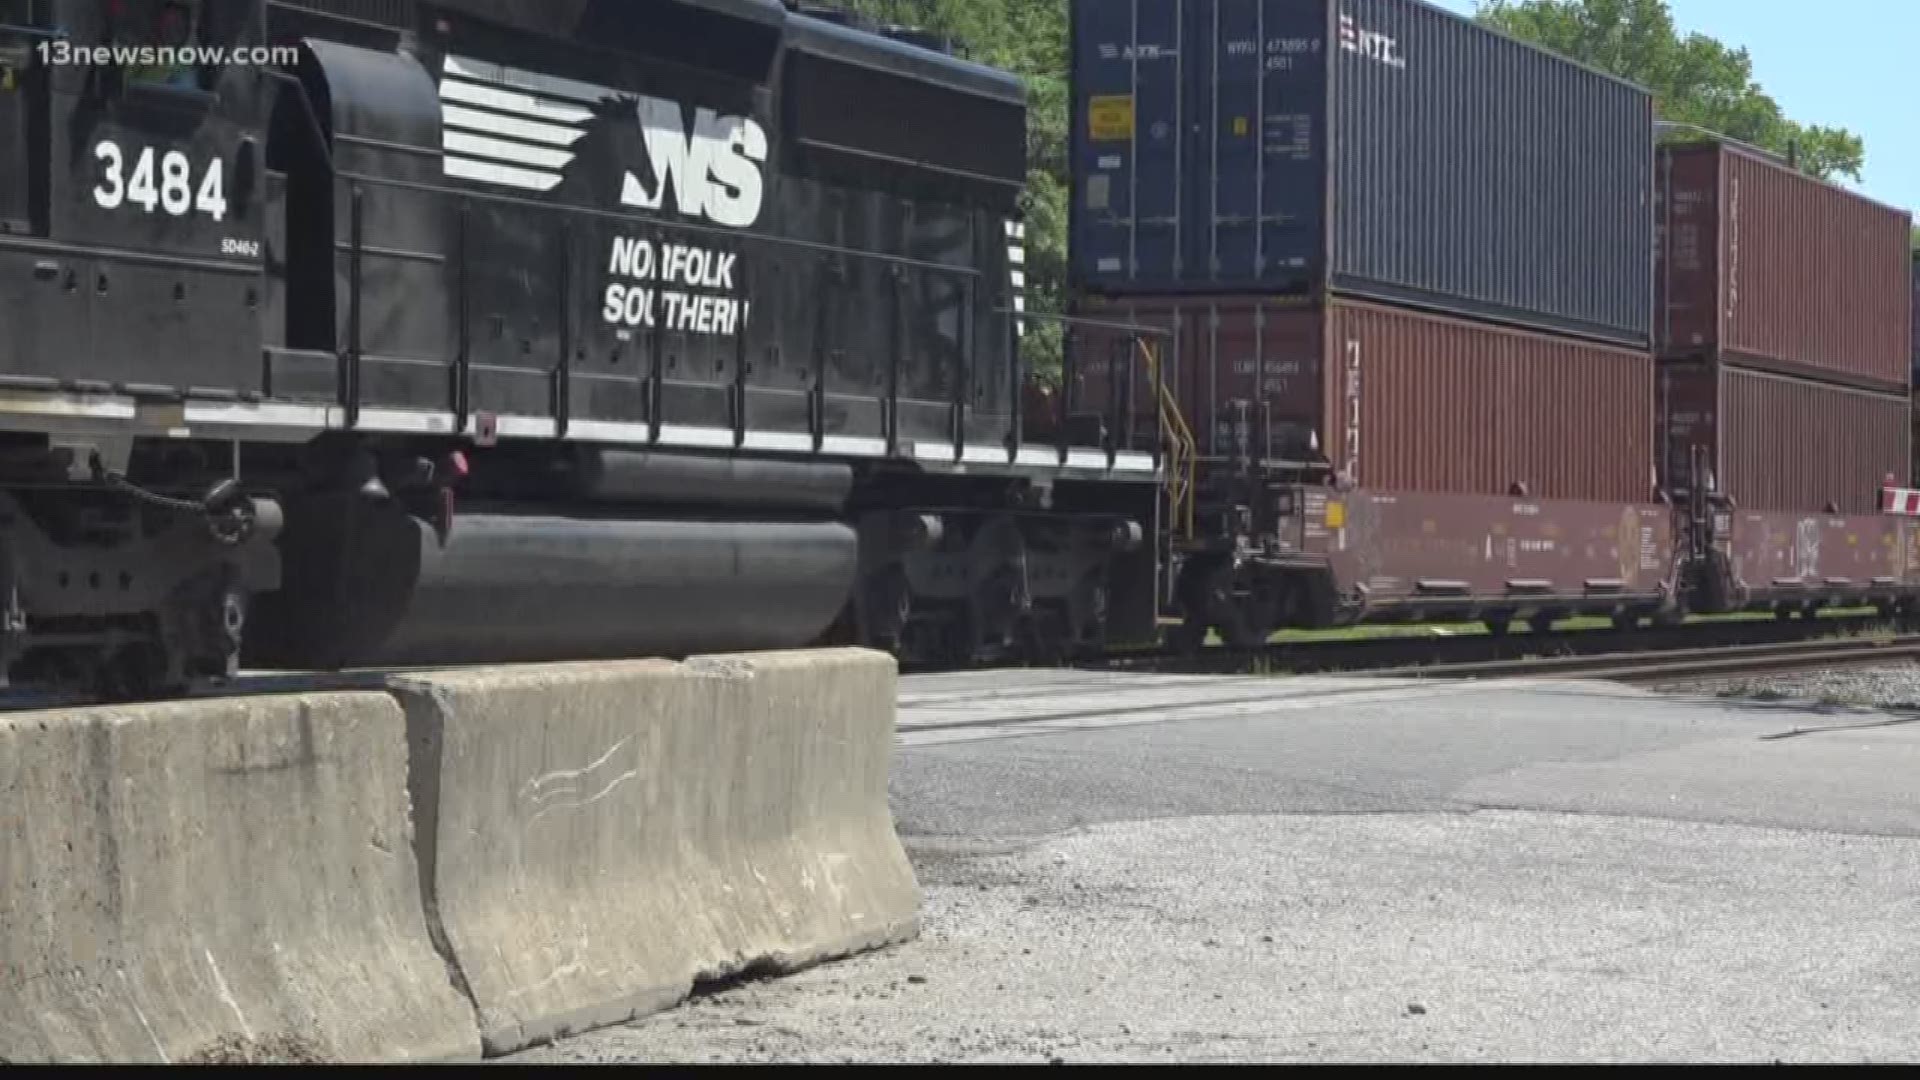 Freight Train Schedules Near Me Verify: How Long Can A Train Legally Block A Crossing? | 13Newsnow.com